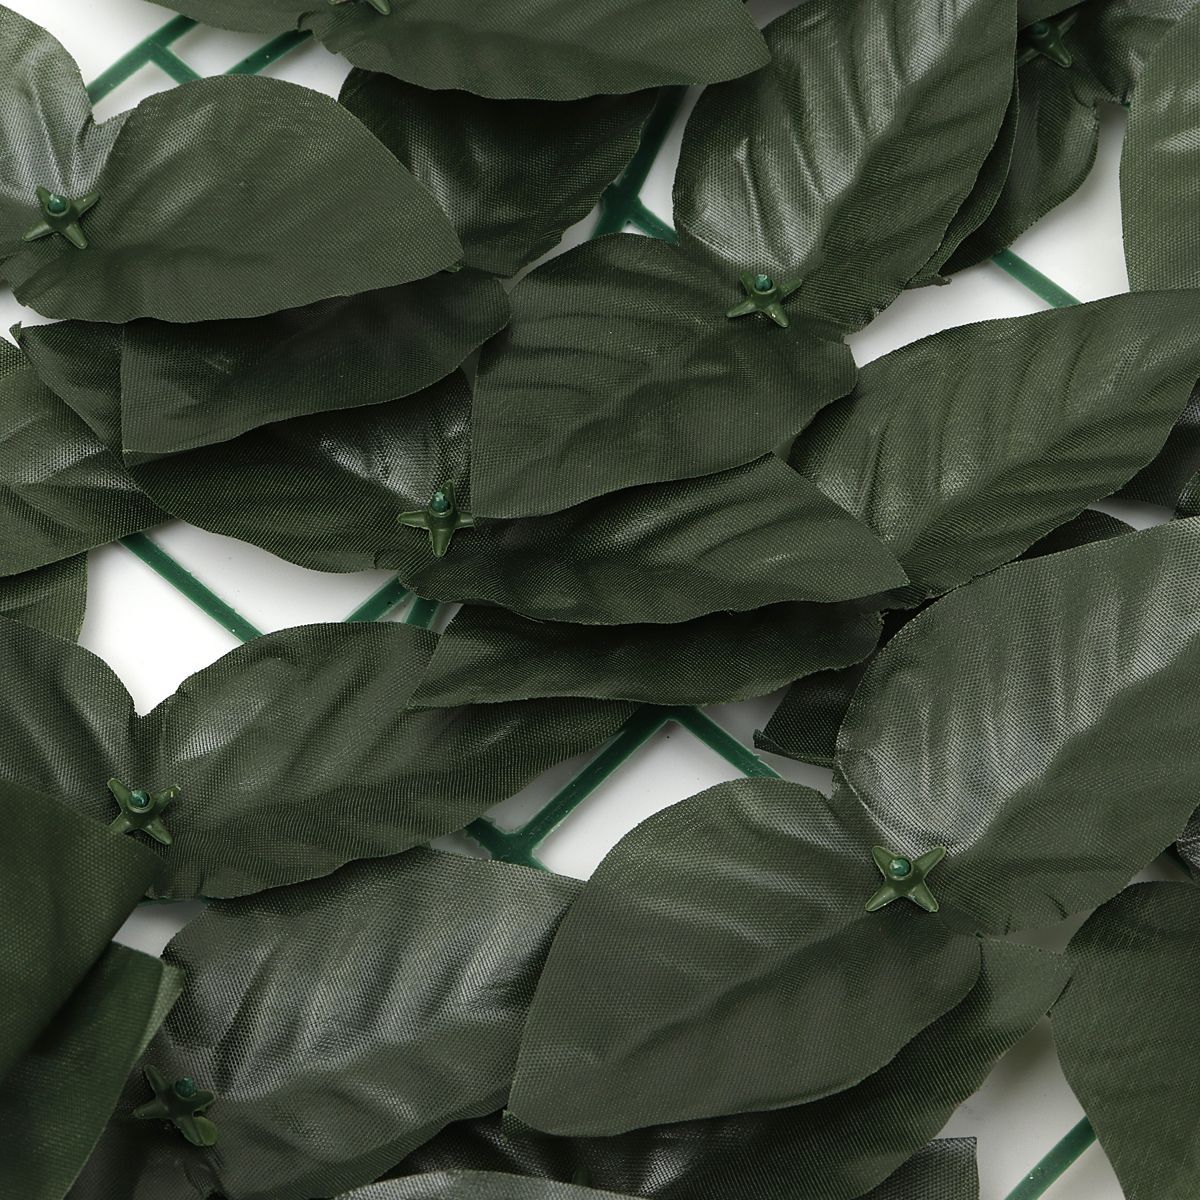 Artificial-Leaves-Foliage-Hanging-Garland-Plant-Flower-Faux-Leaf-Home-Decoration-1737133